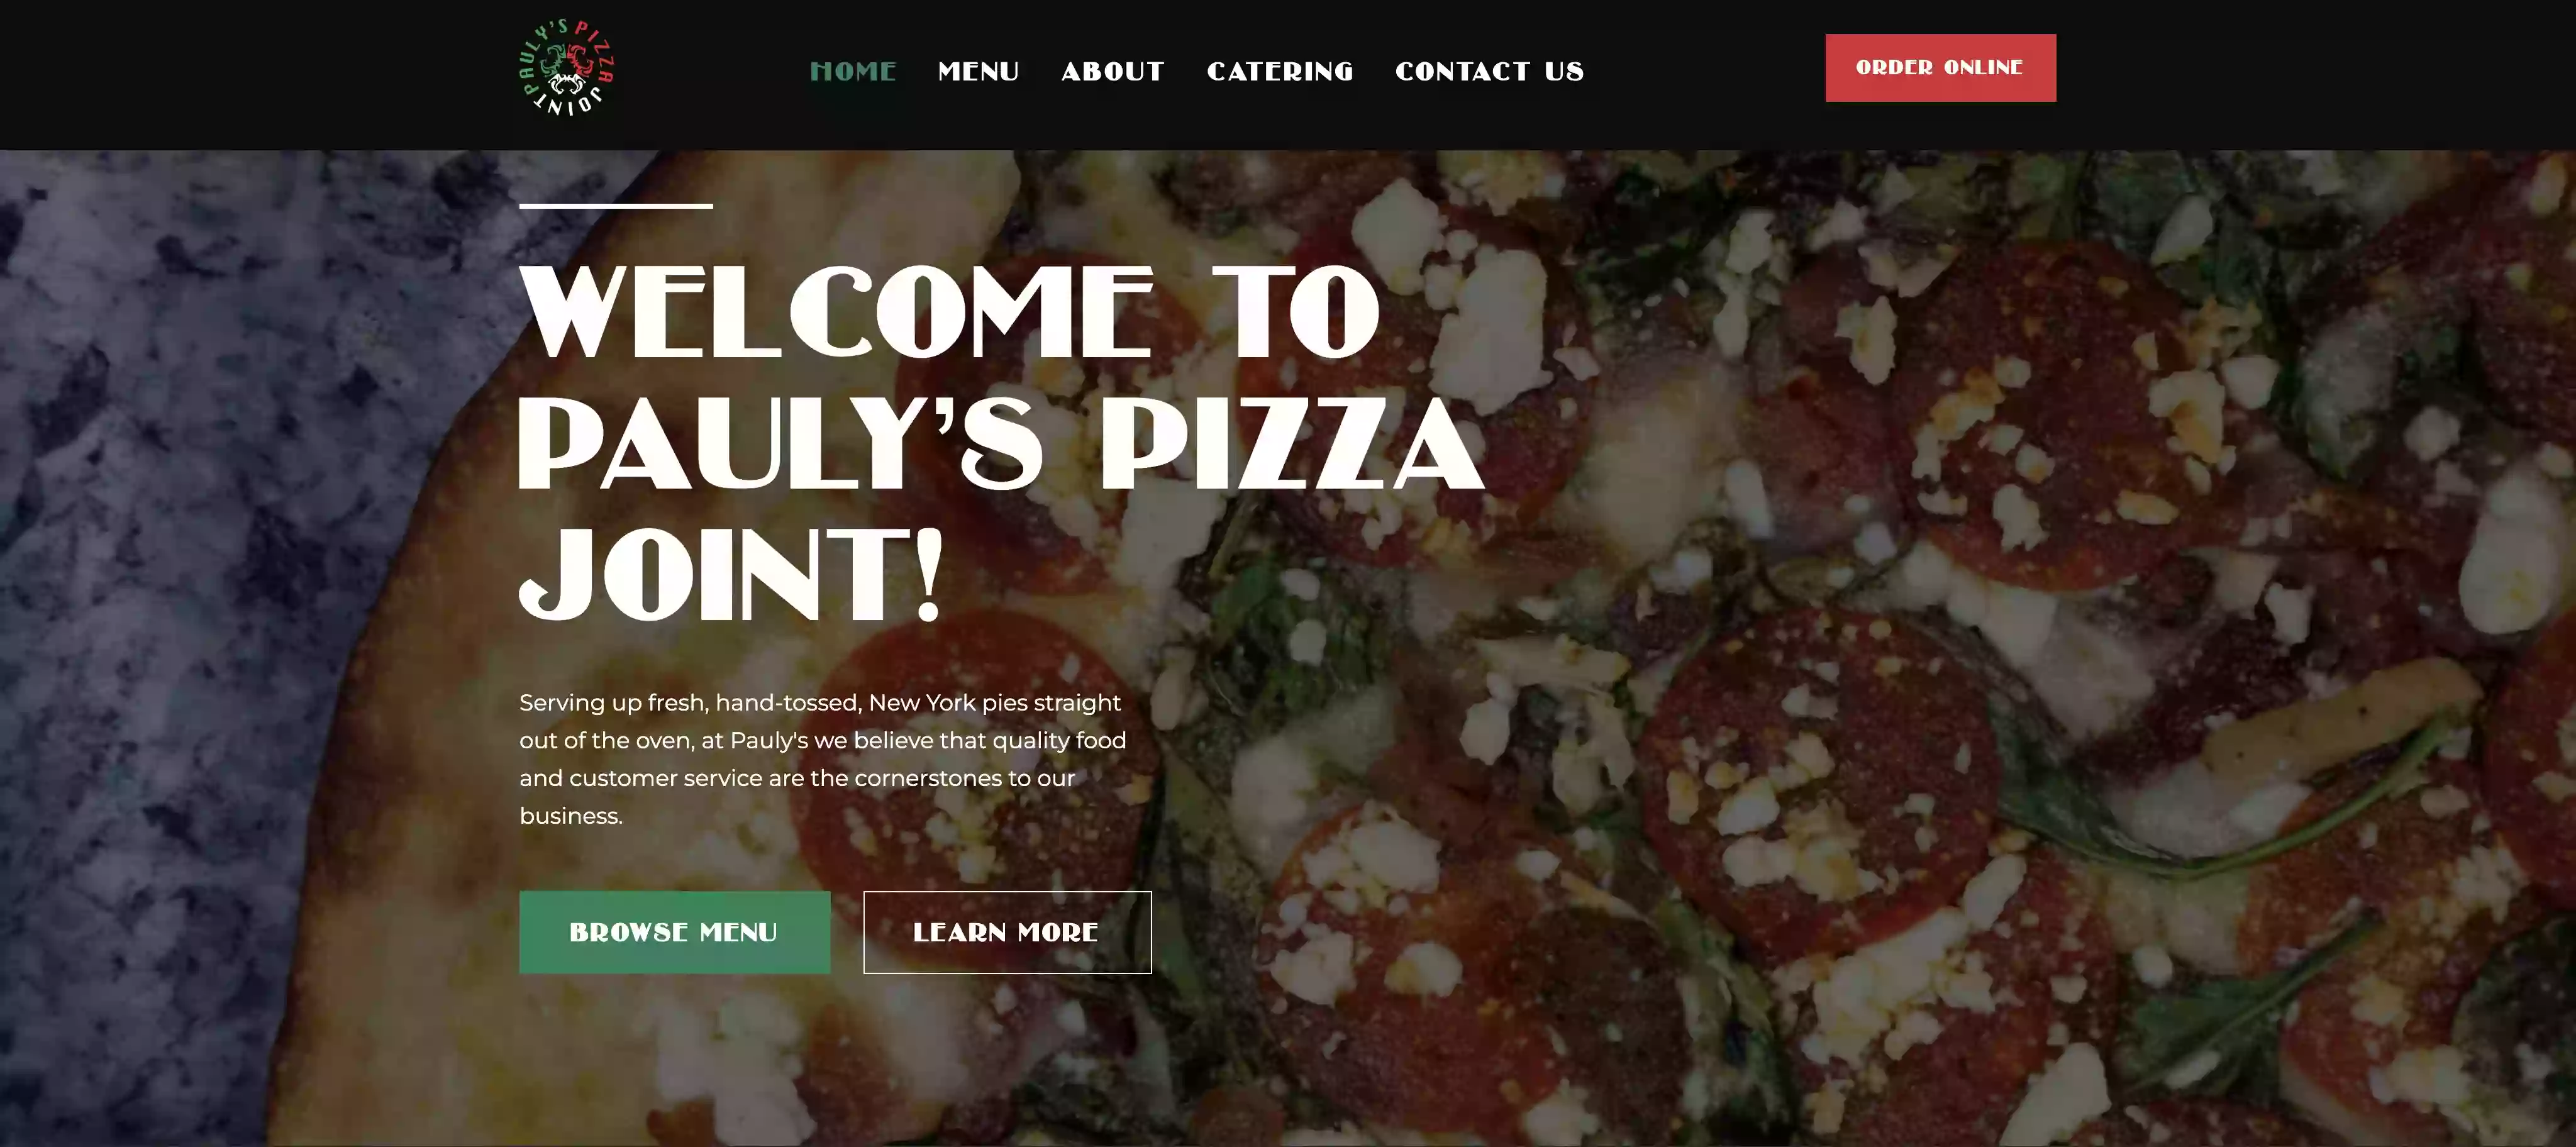 Pauly's Pizza Joint